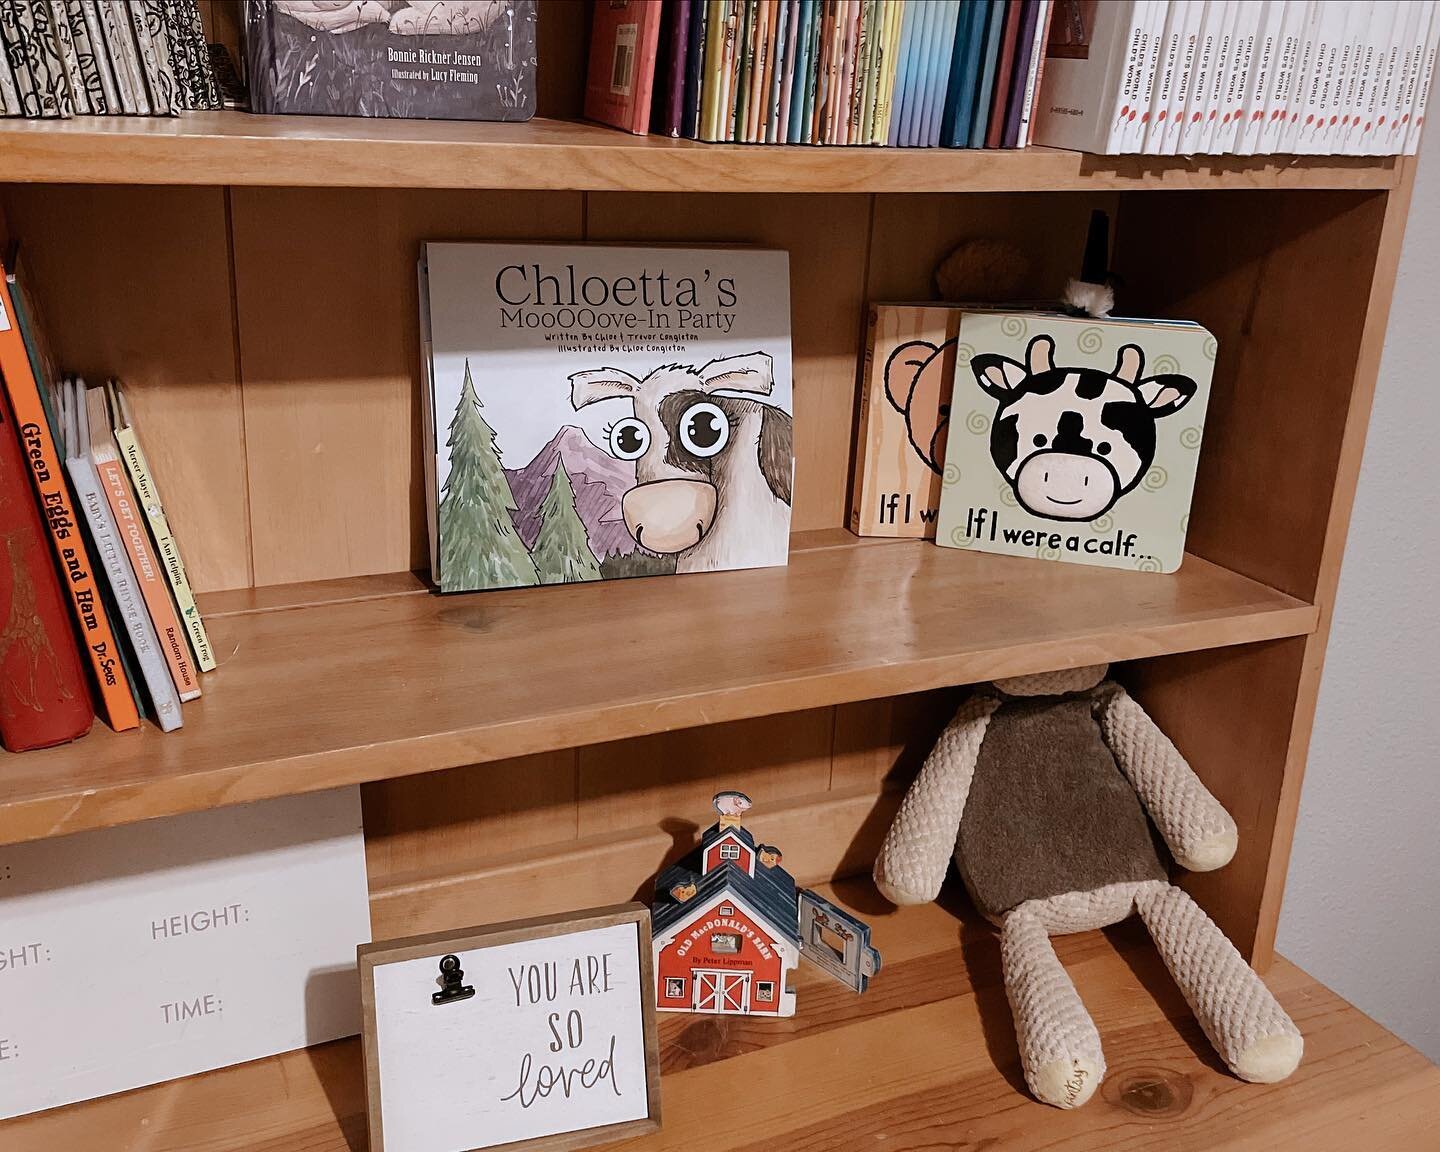 We have loved seeing pictures of our book in new nurseries!!!!! Thank you to everyone sending us photos of you and your new book!!!!
.
Make sure you tag @unfoldedfables and your new book! We would love to see it!!!! Or feel free to PM us!!! Thank you